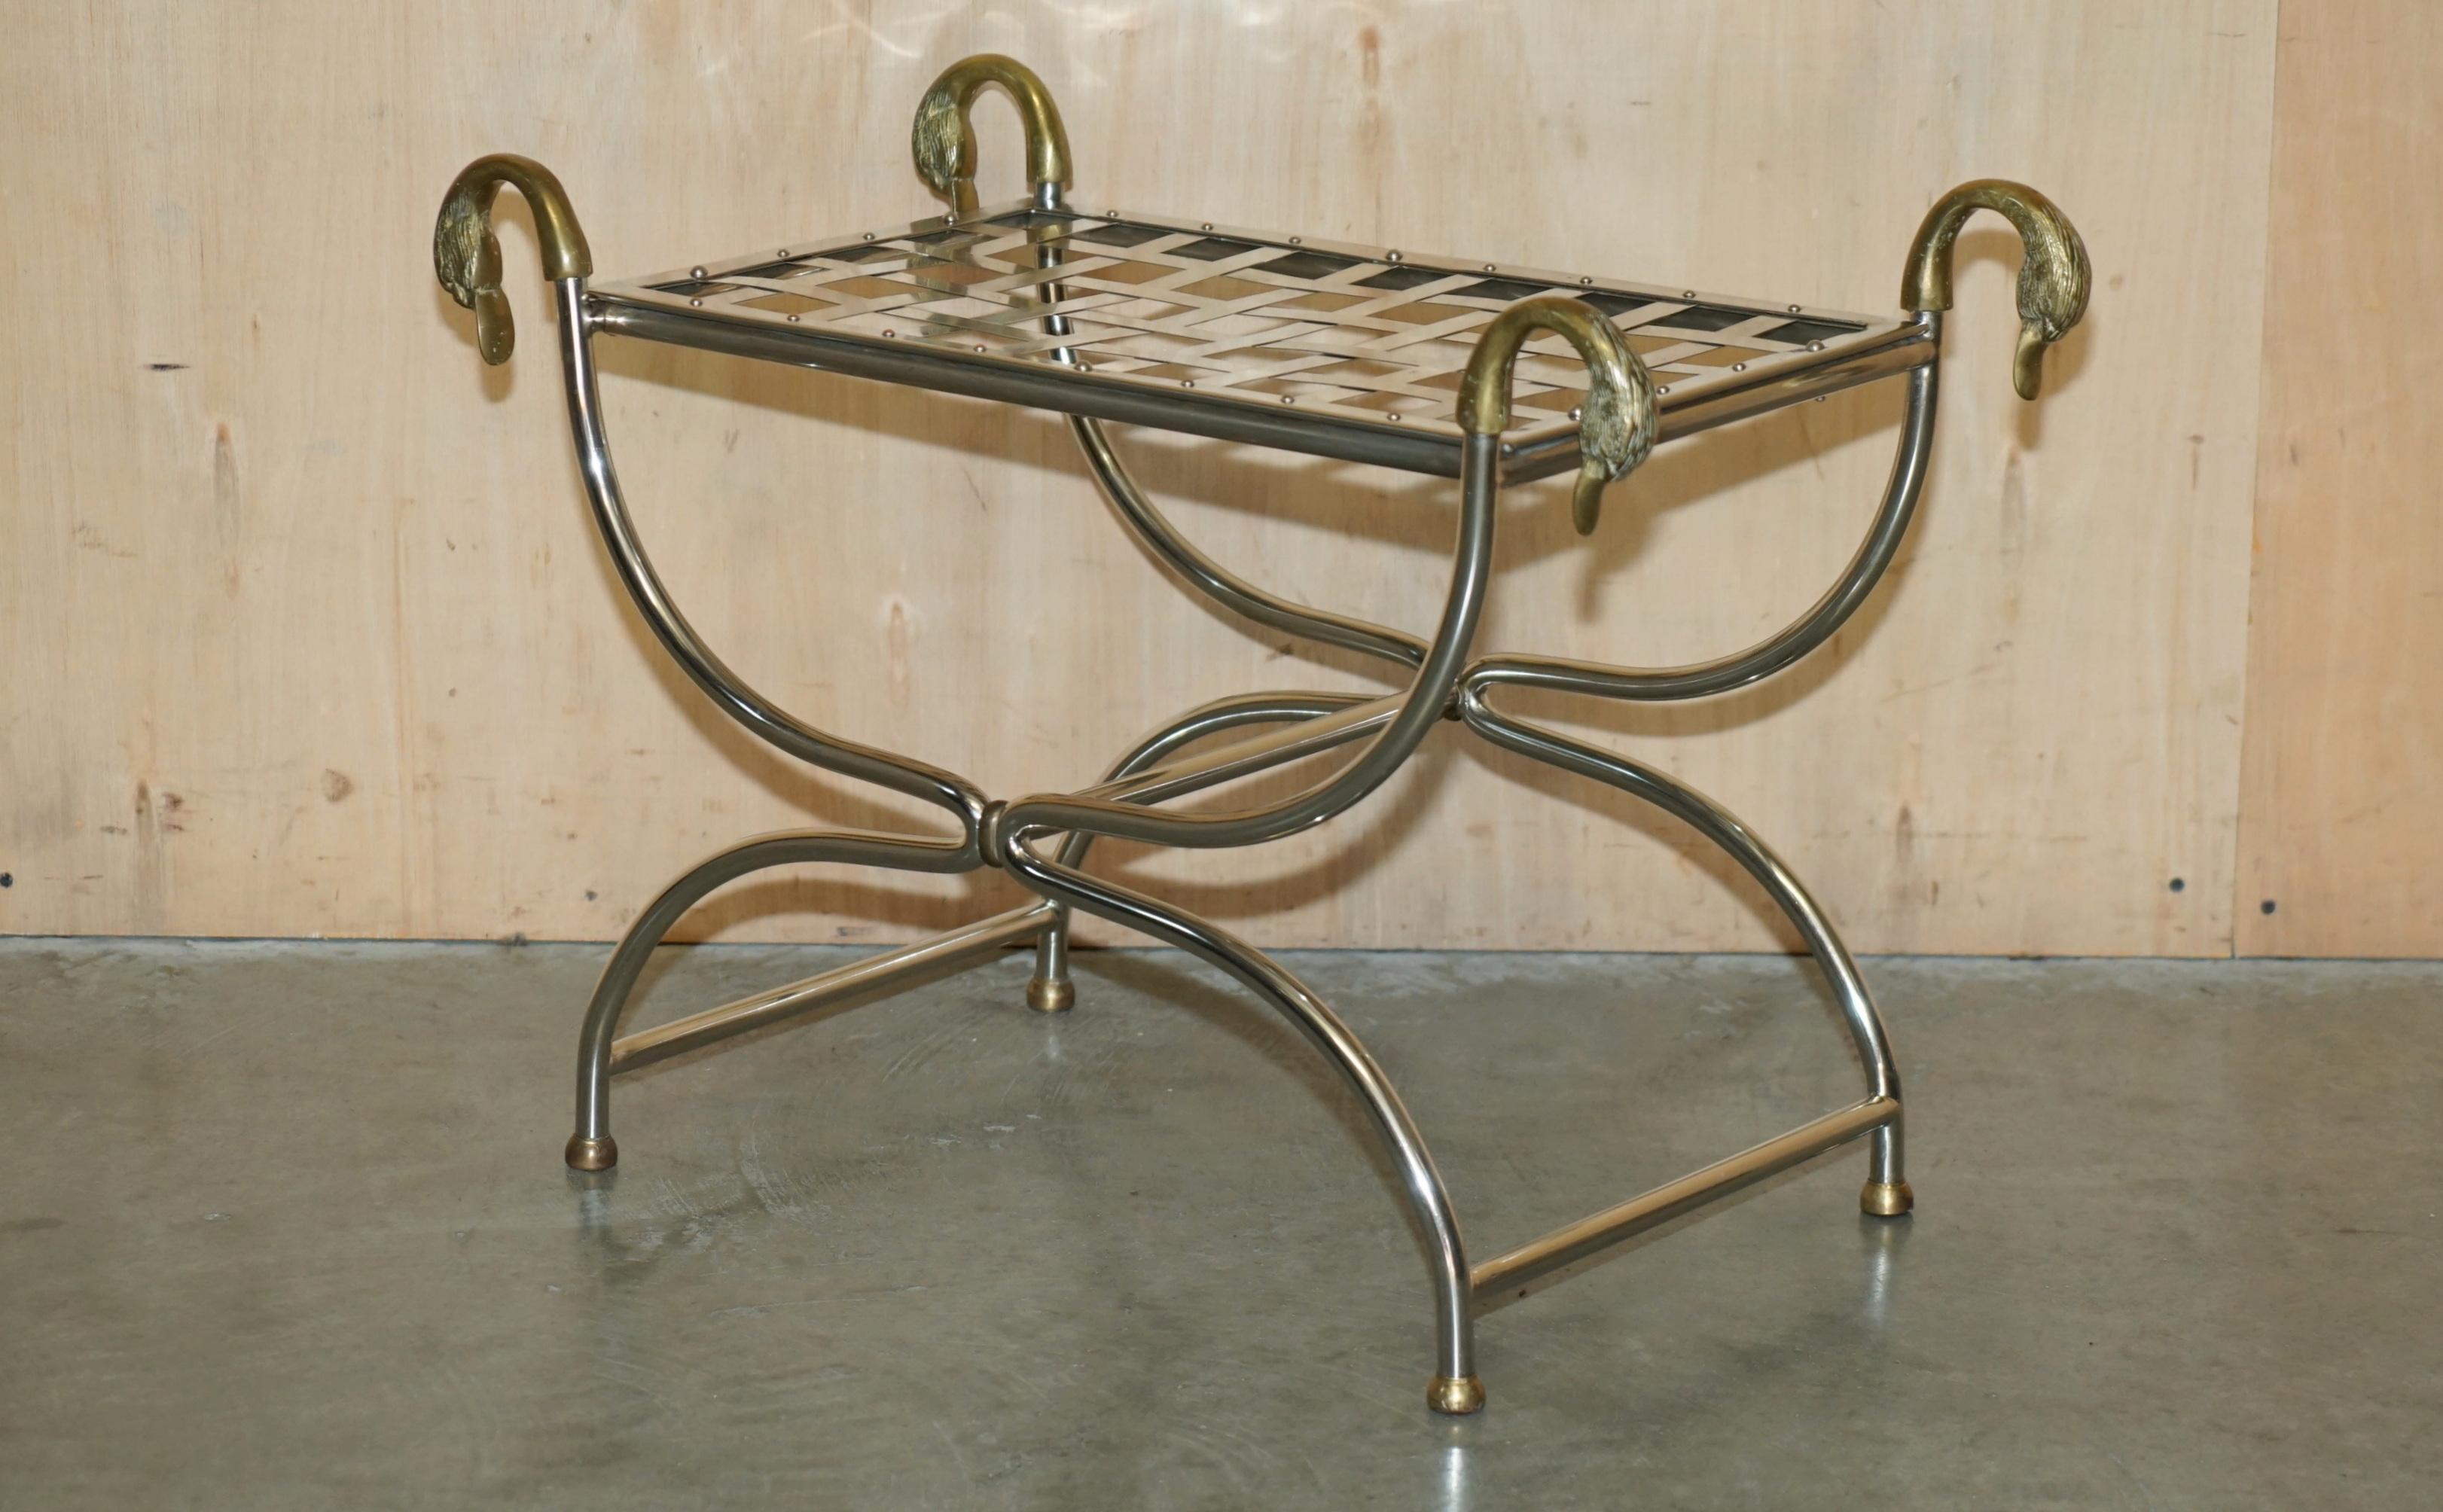 Royal House Antiques

Royal House Antiques is delighted to offer for sale this lovely original circa 1940's polished chrome and brass Maison Jansen France side table or stool with Duck's heads

Please note the delivery fee listed is just a guide, it